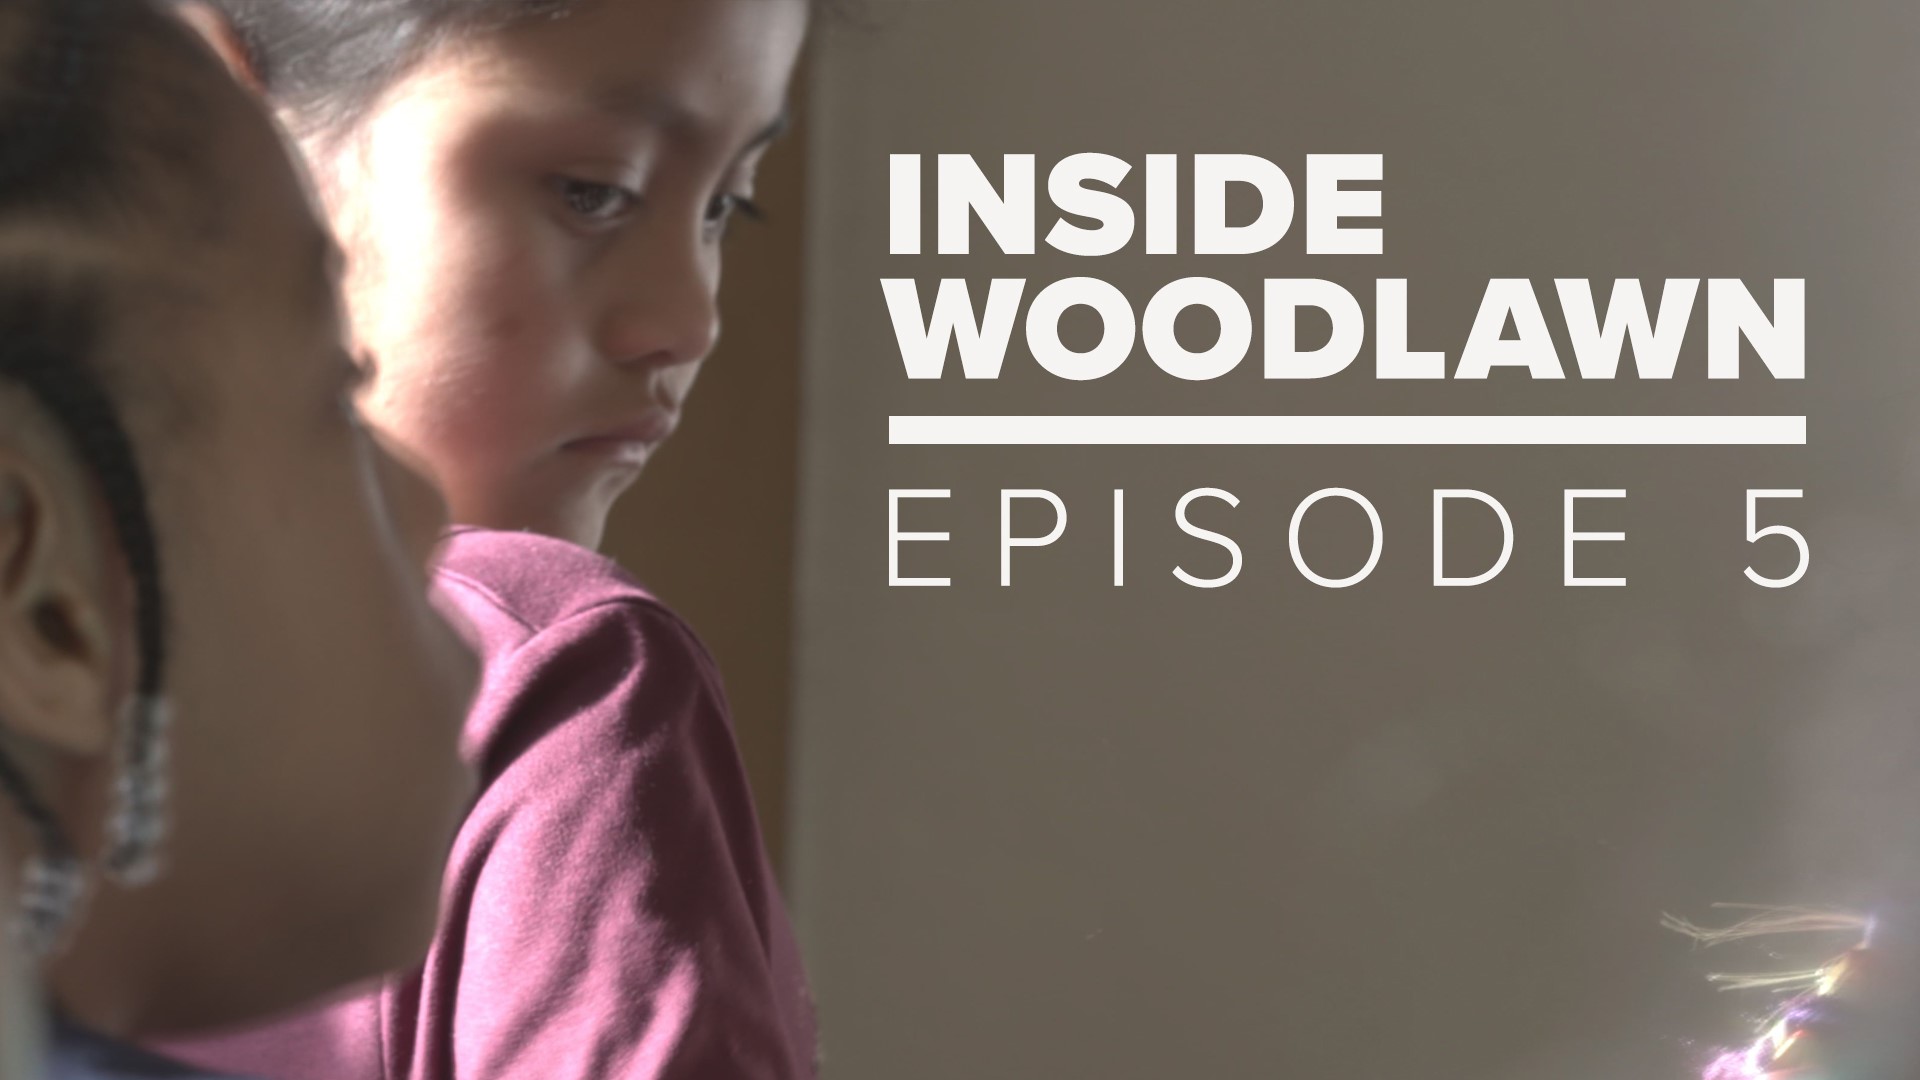 Our latest episode of the yearlong series "Inside Woodlawn" looks at the emotional toll on the school when a young girl was sent out of the country.